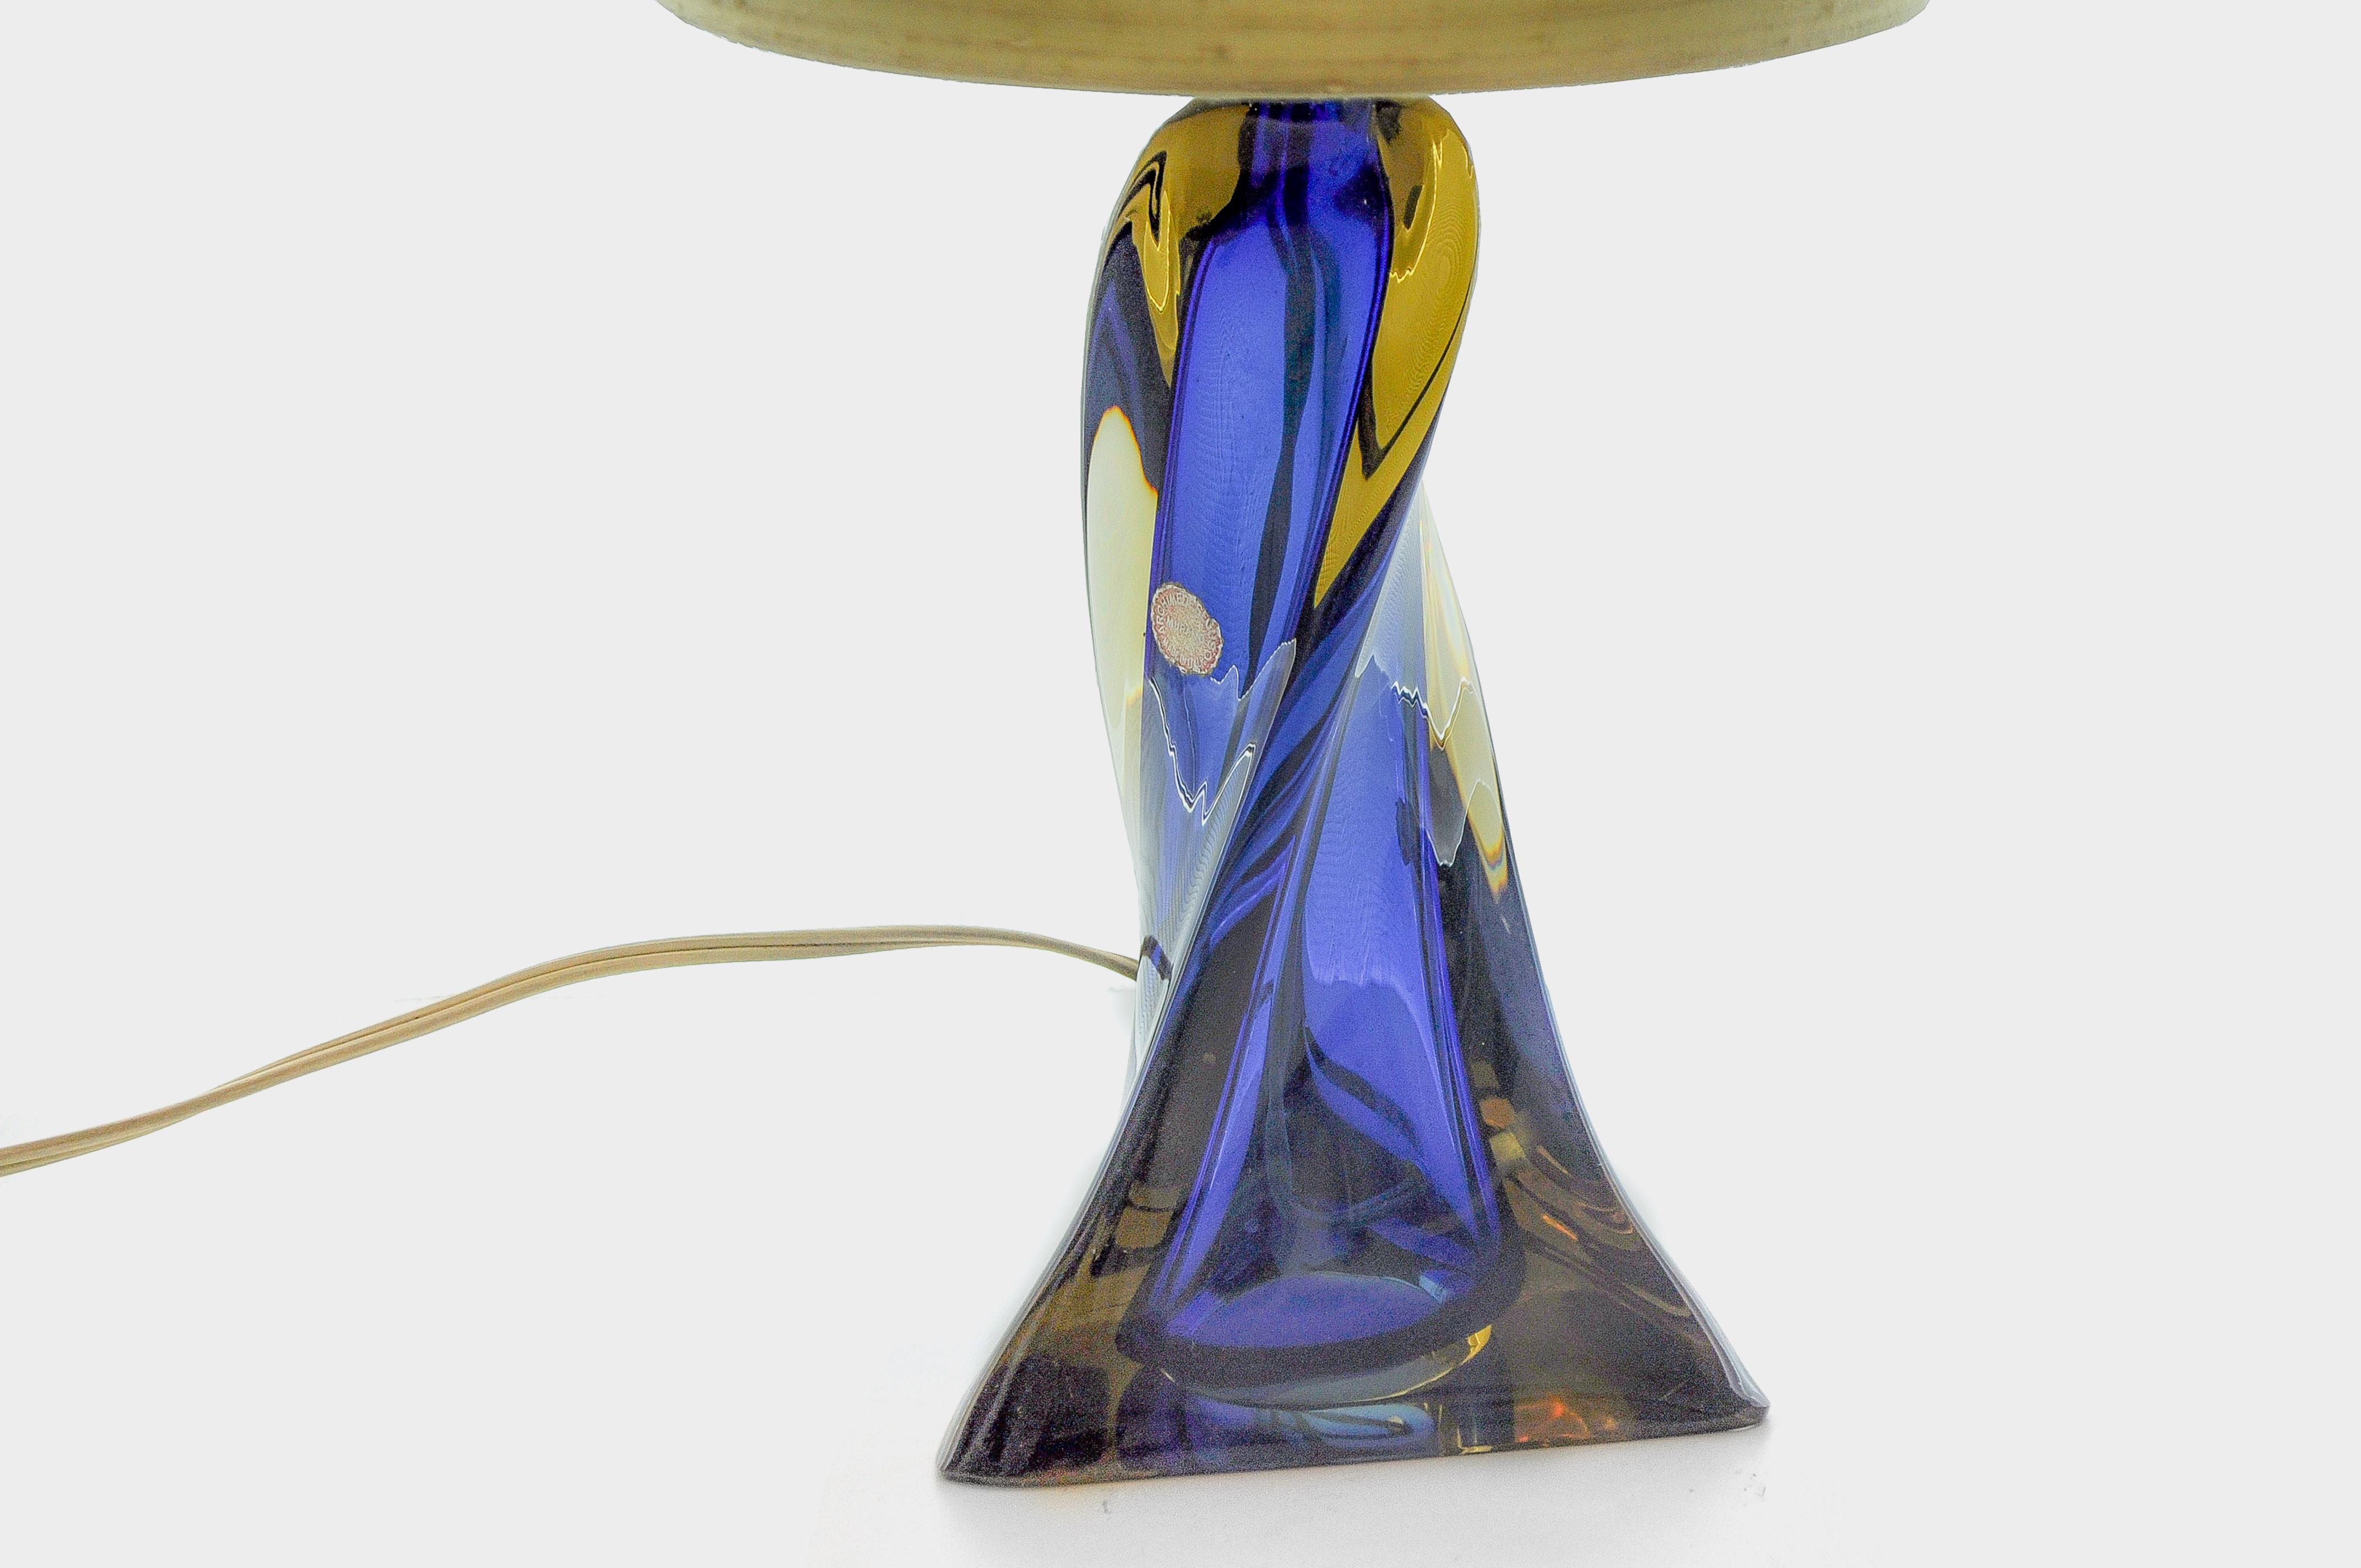 This small table lamp made of two-colored Murano glass comes from the glass factory of Archimede Seguso. It is a blue/amber colored glass with a triangular base, which is tapered in a spiral shape. The original shade is beige with a subtle